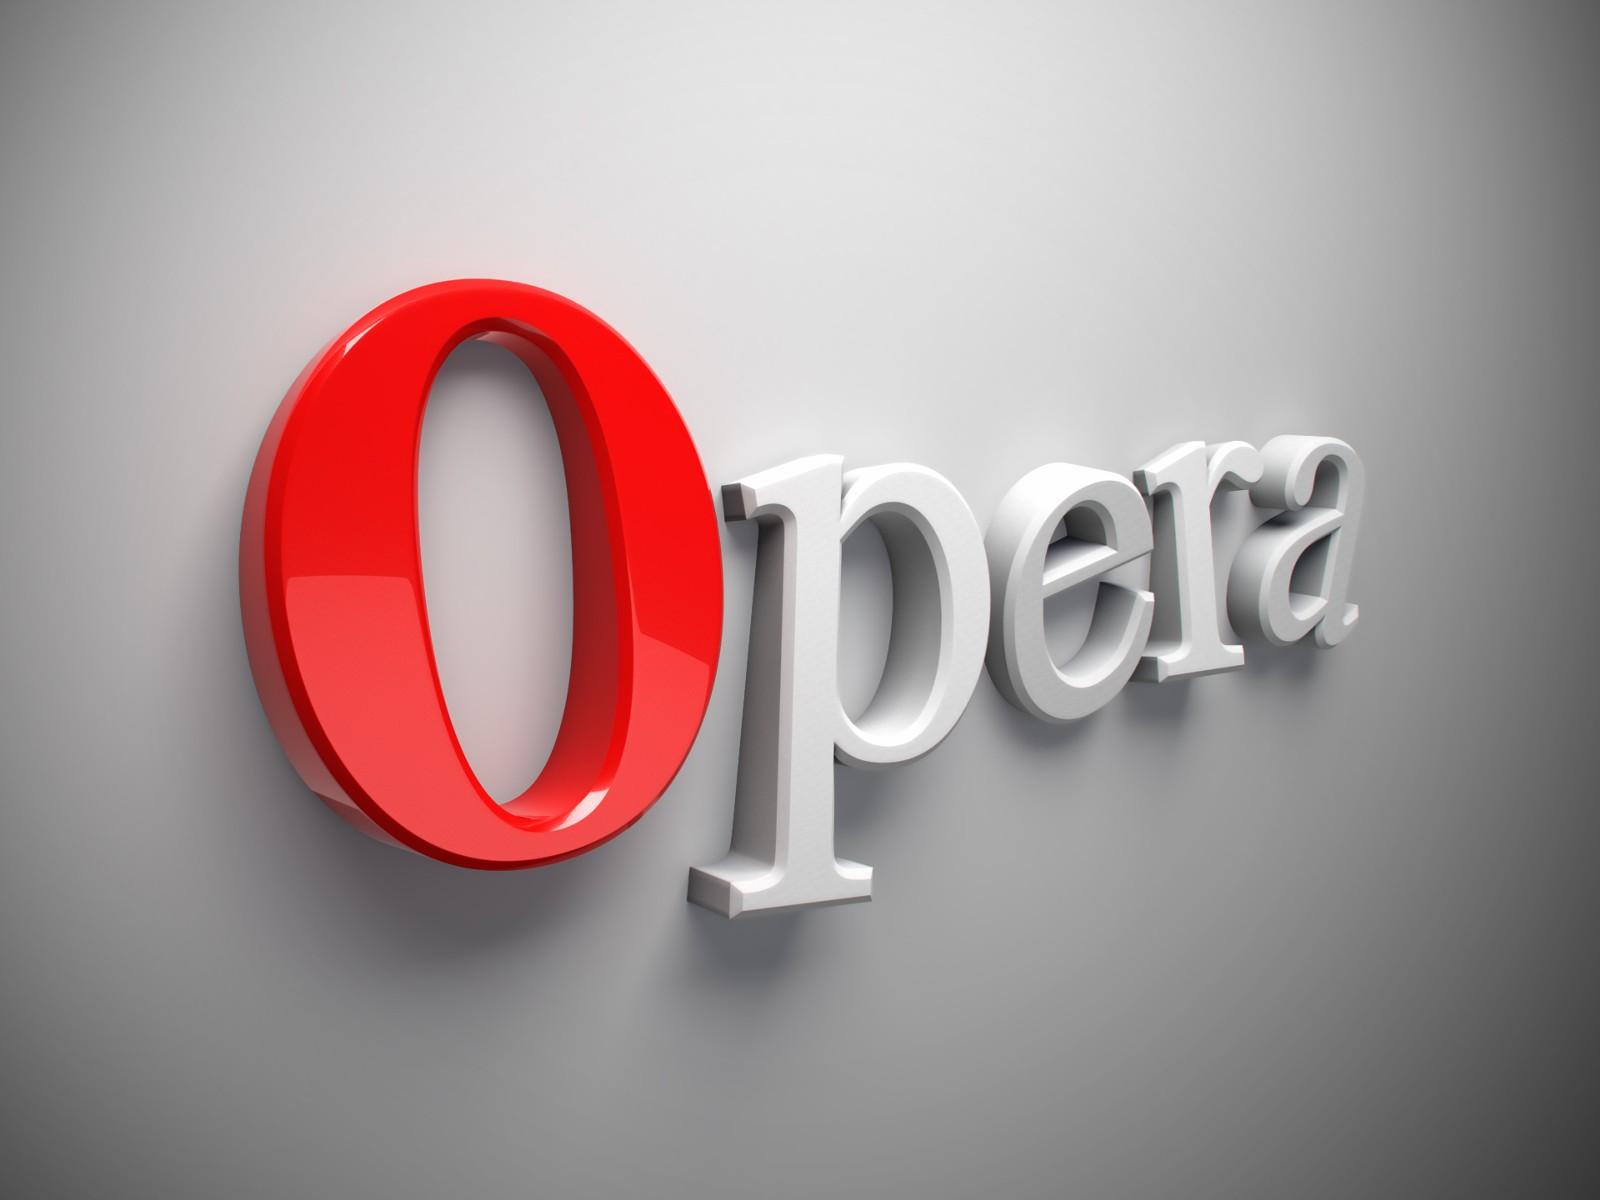 Opera Mini Web Browser for Android snags a new major update 1